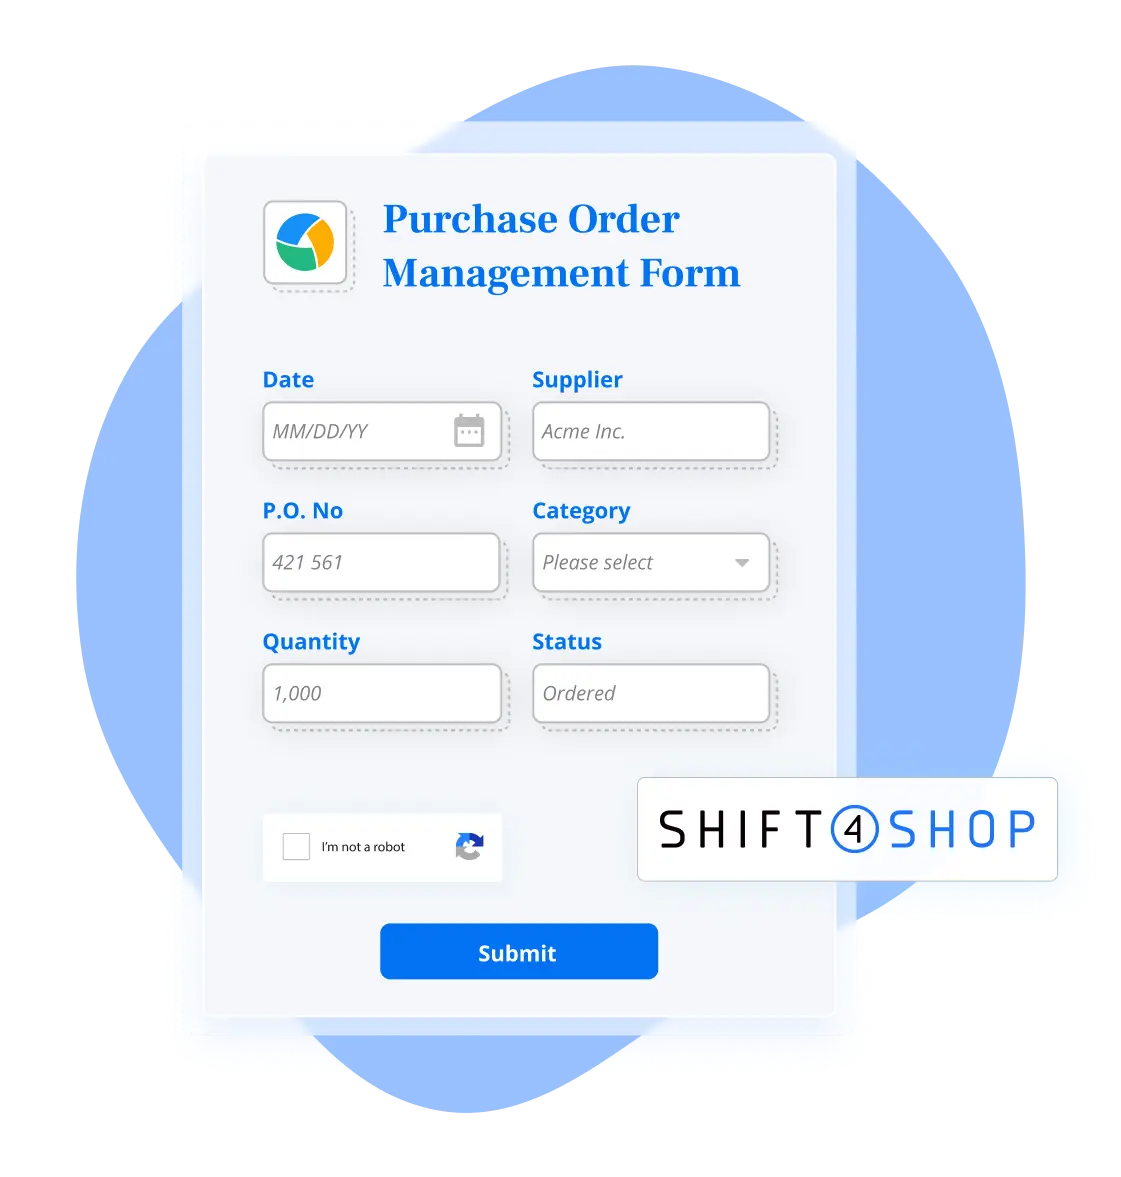 Image showing a purchase order management form integration with Shift4Shop